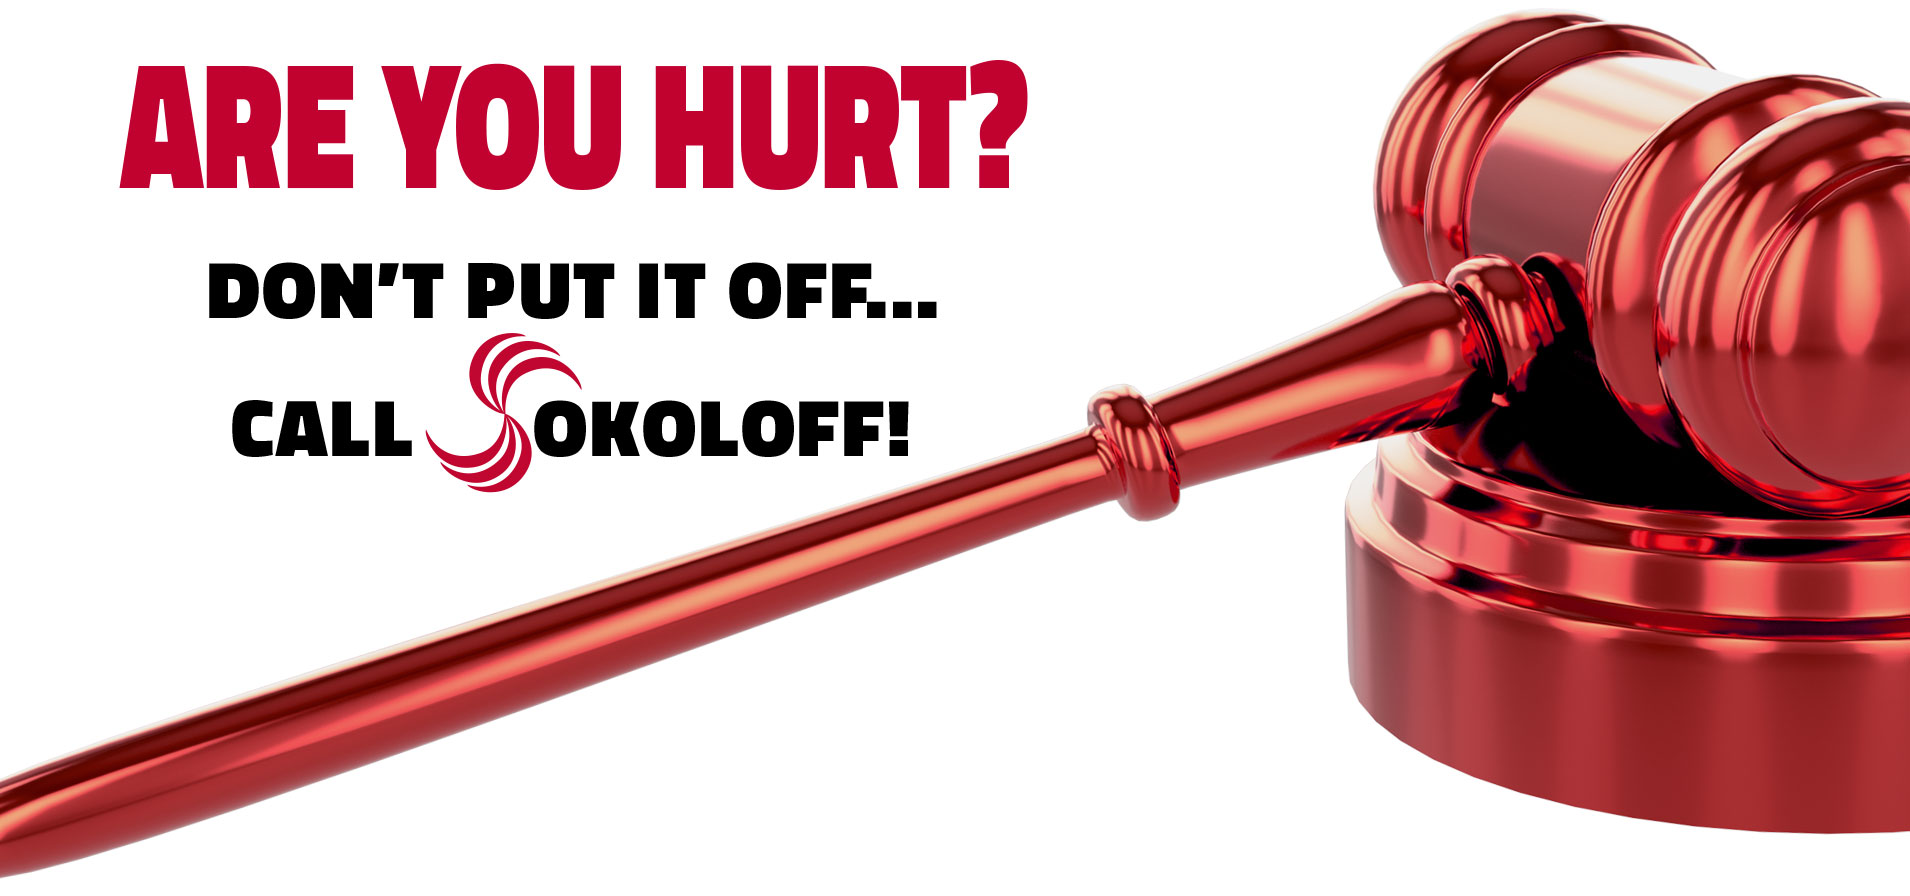 Are you hurt? on't put it off... Call Sokoloff 416-966-4878